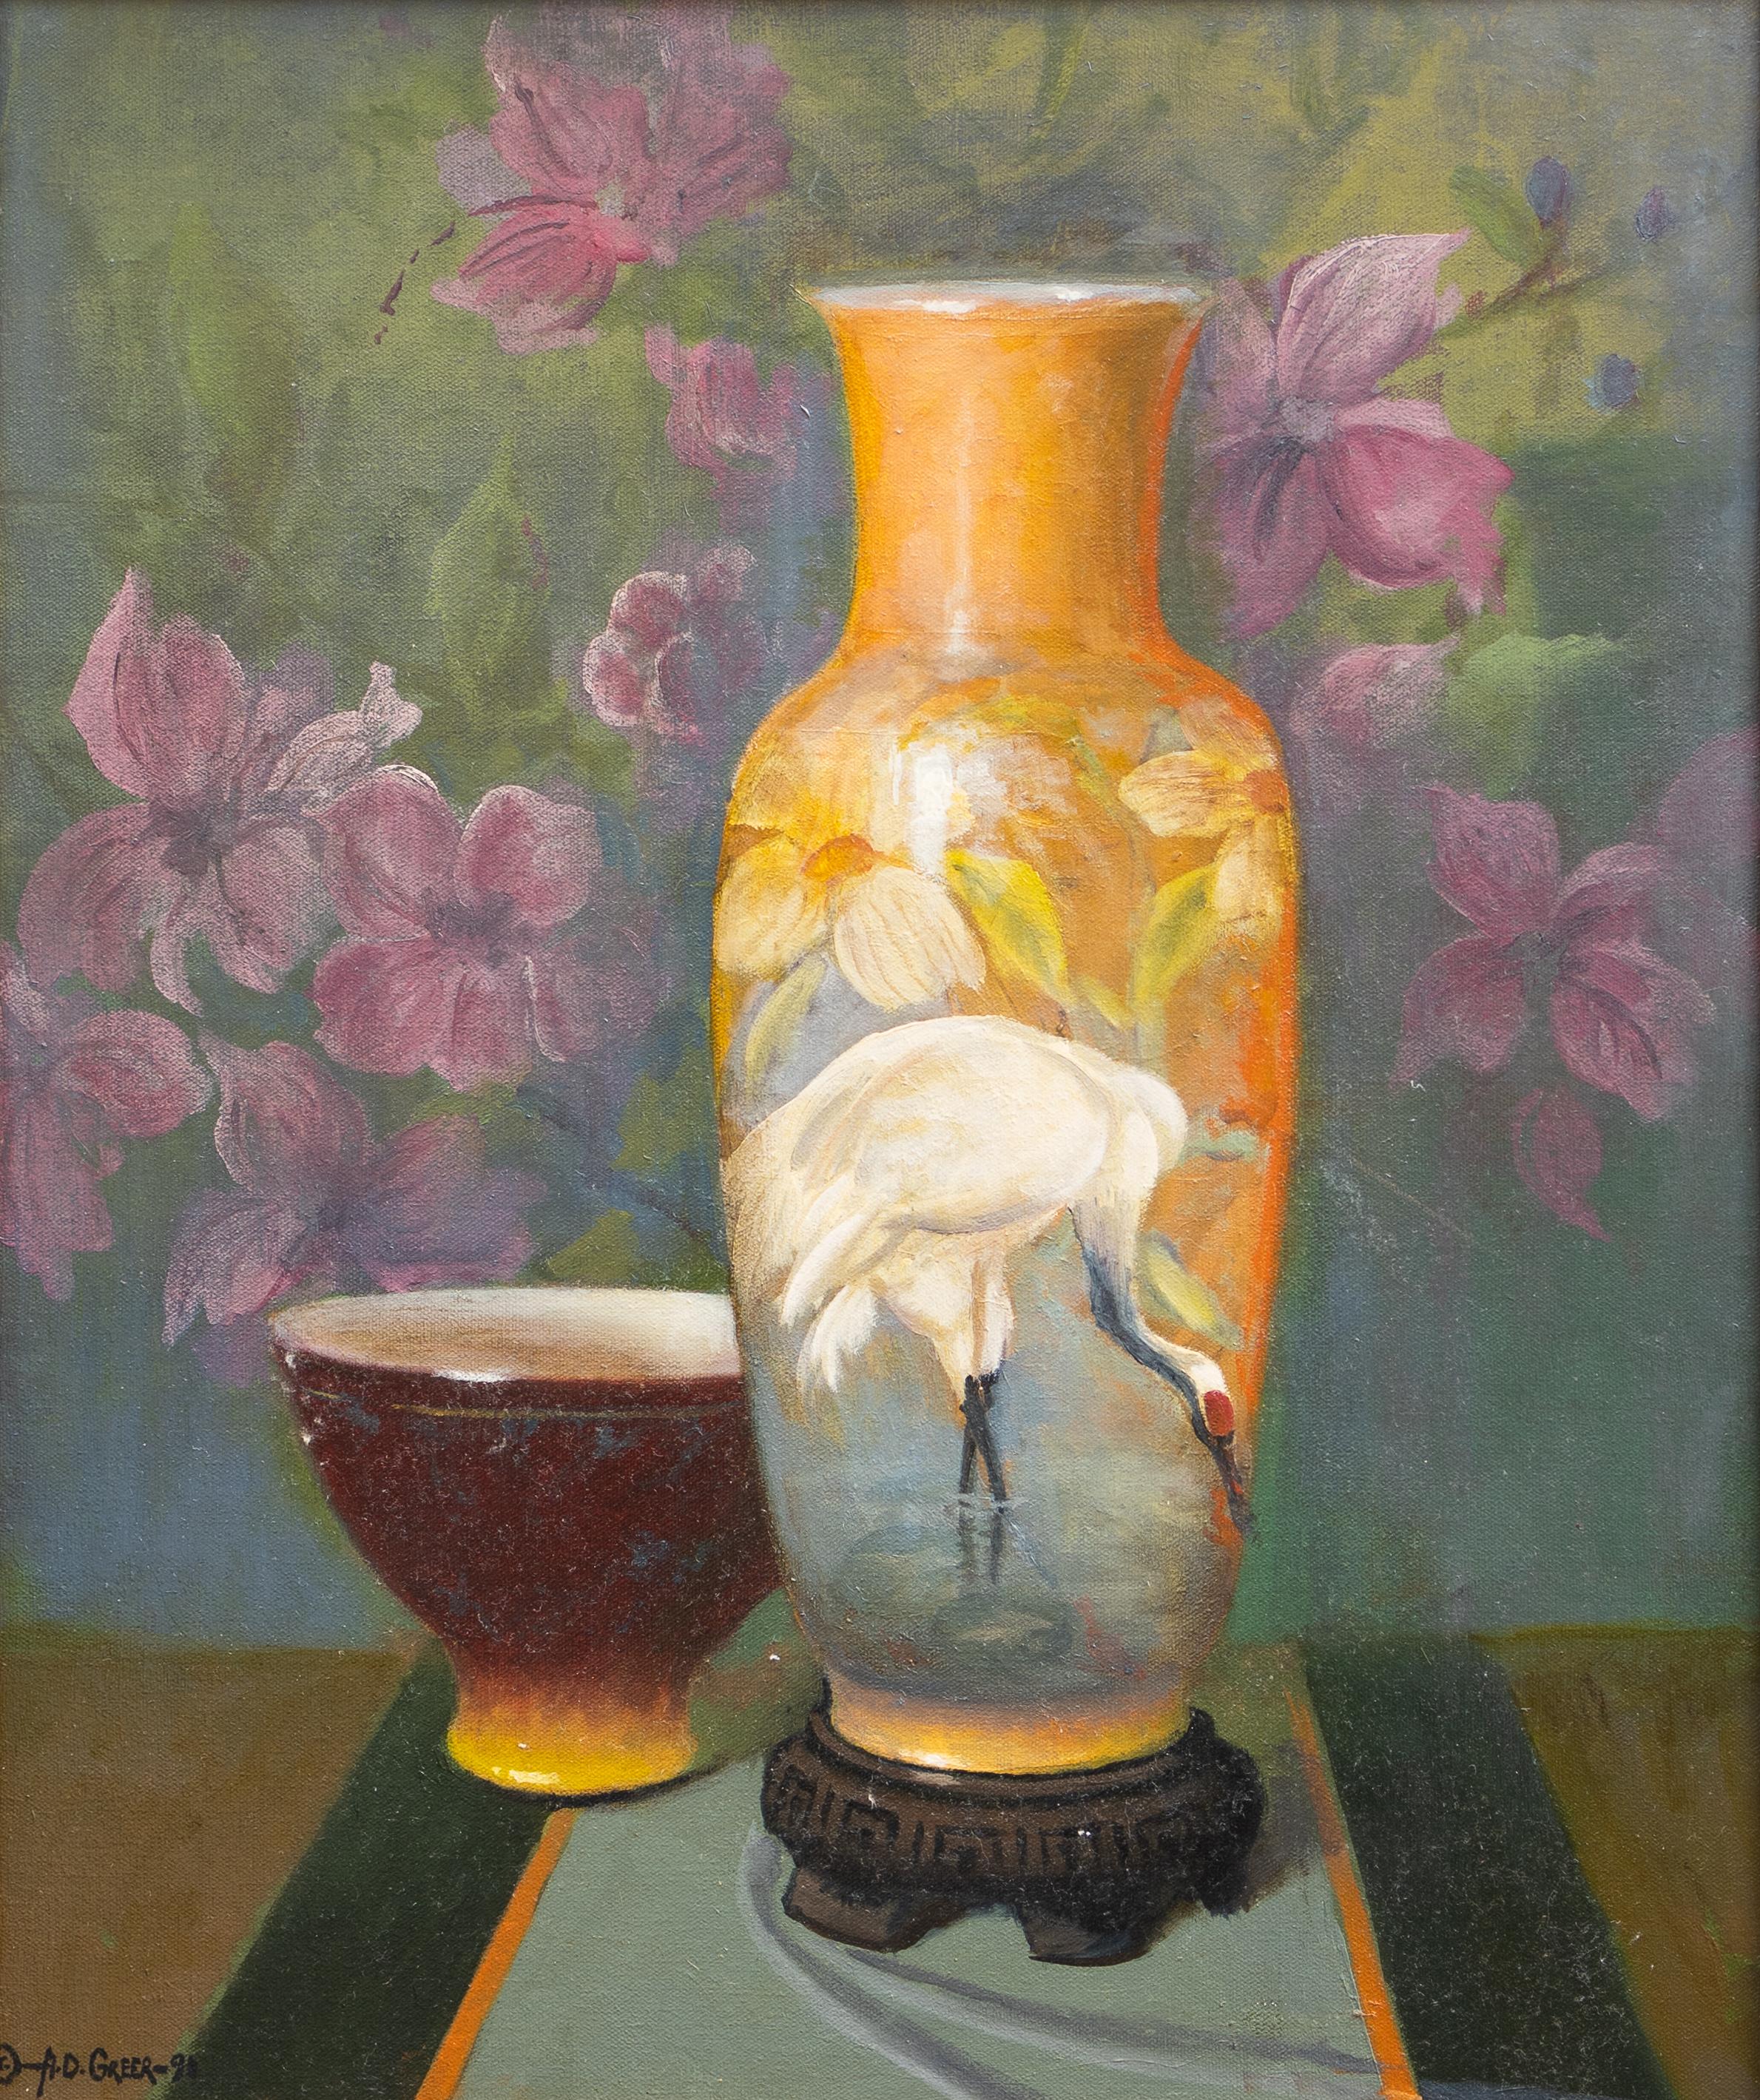 A.D. Greer Still-Life Painting - "Still Life Vase with Egret" Orange Blue Gray Pink White Brown Green Bird Floral